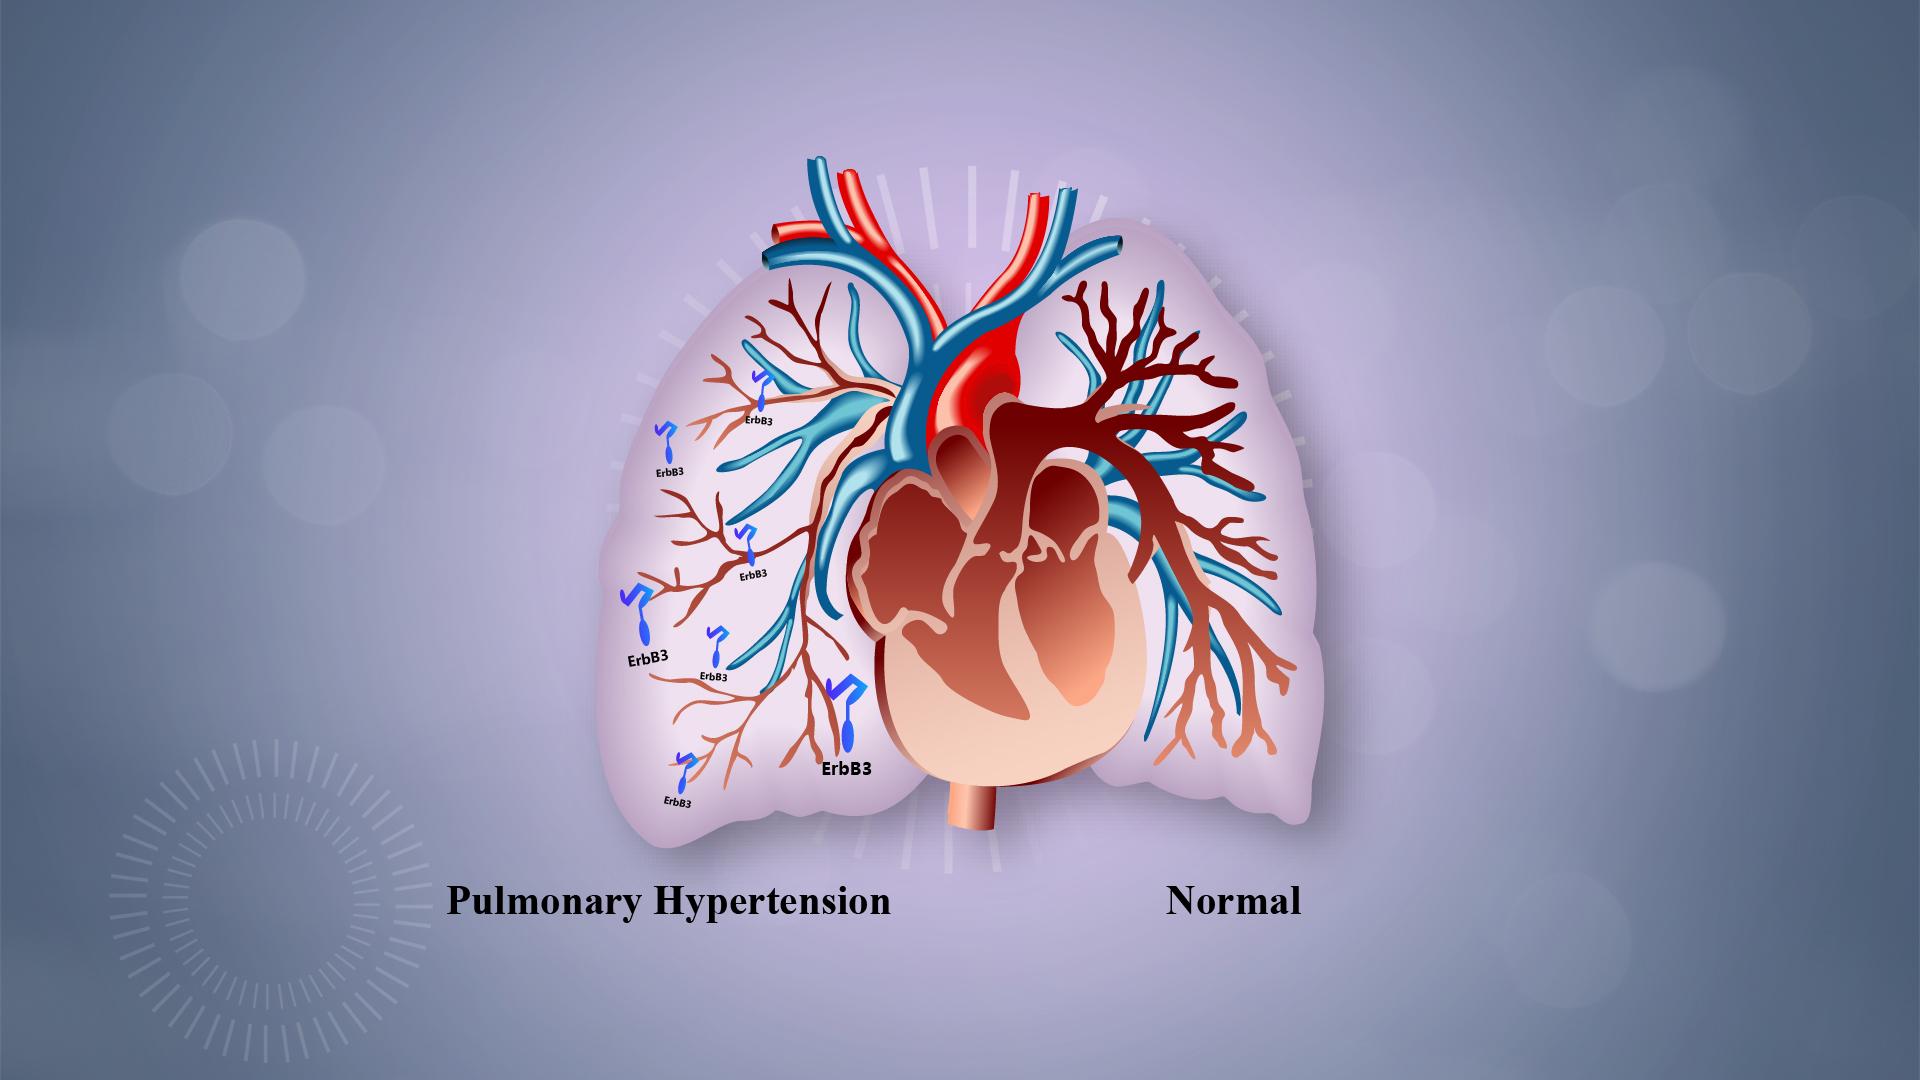 Researchers reveal new approach to treat pulmonary hypertension